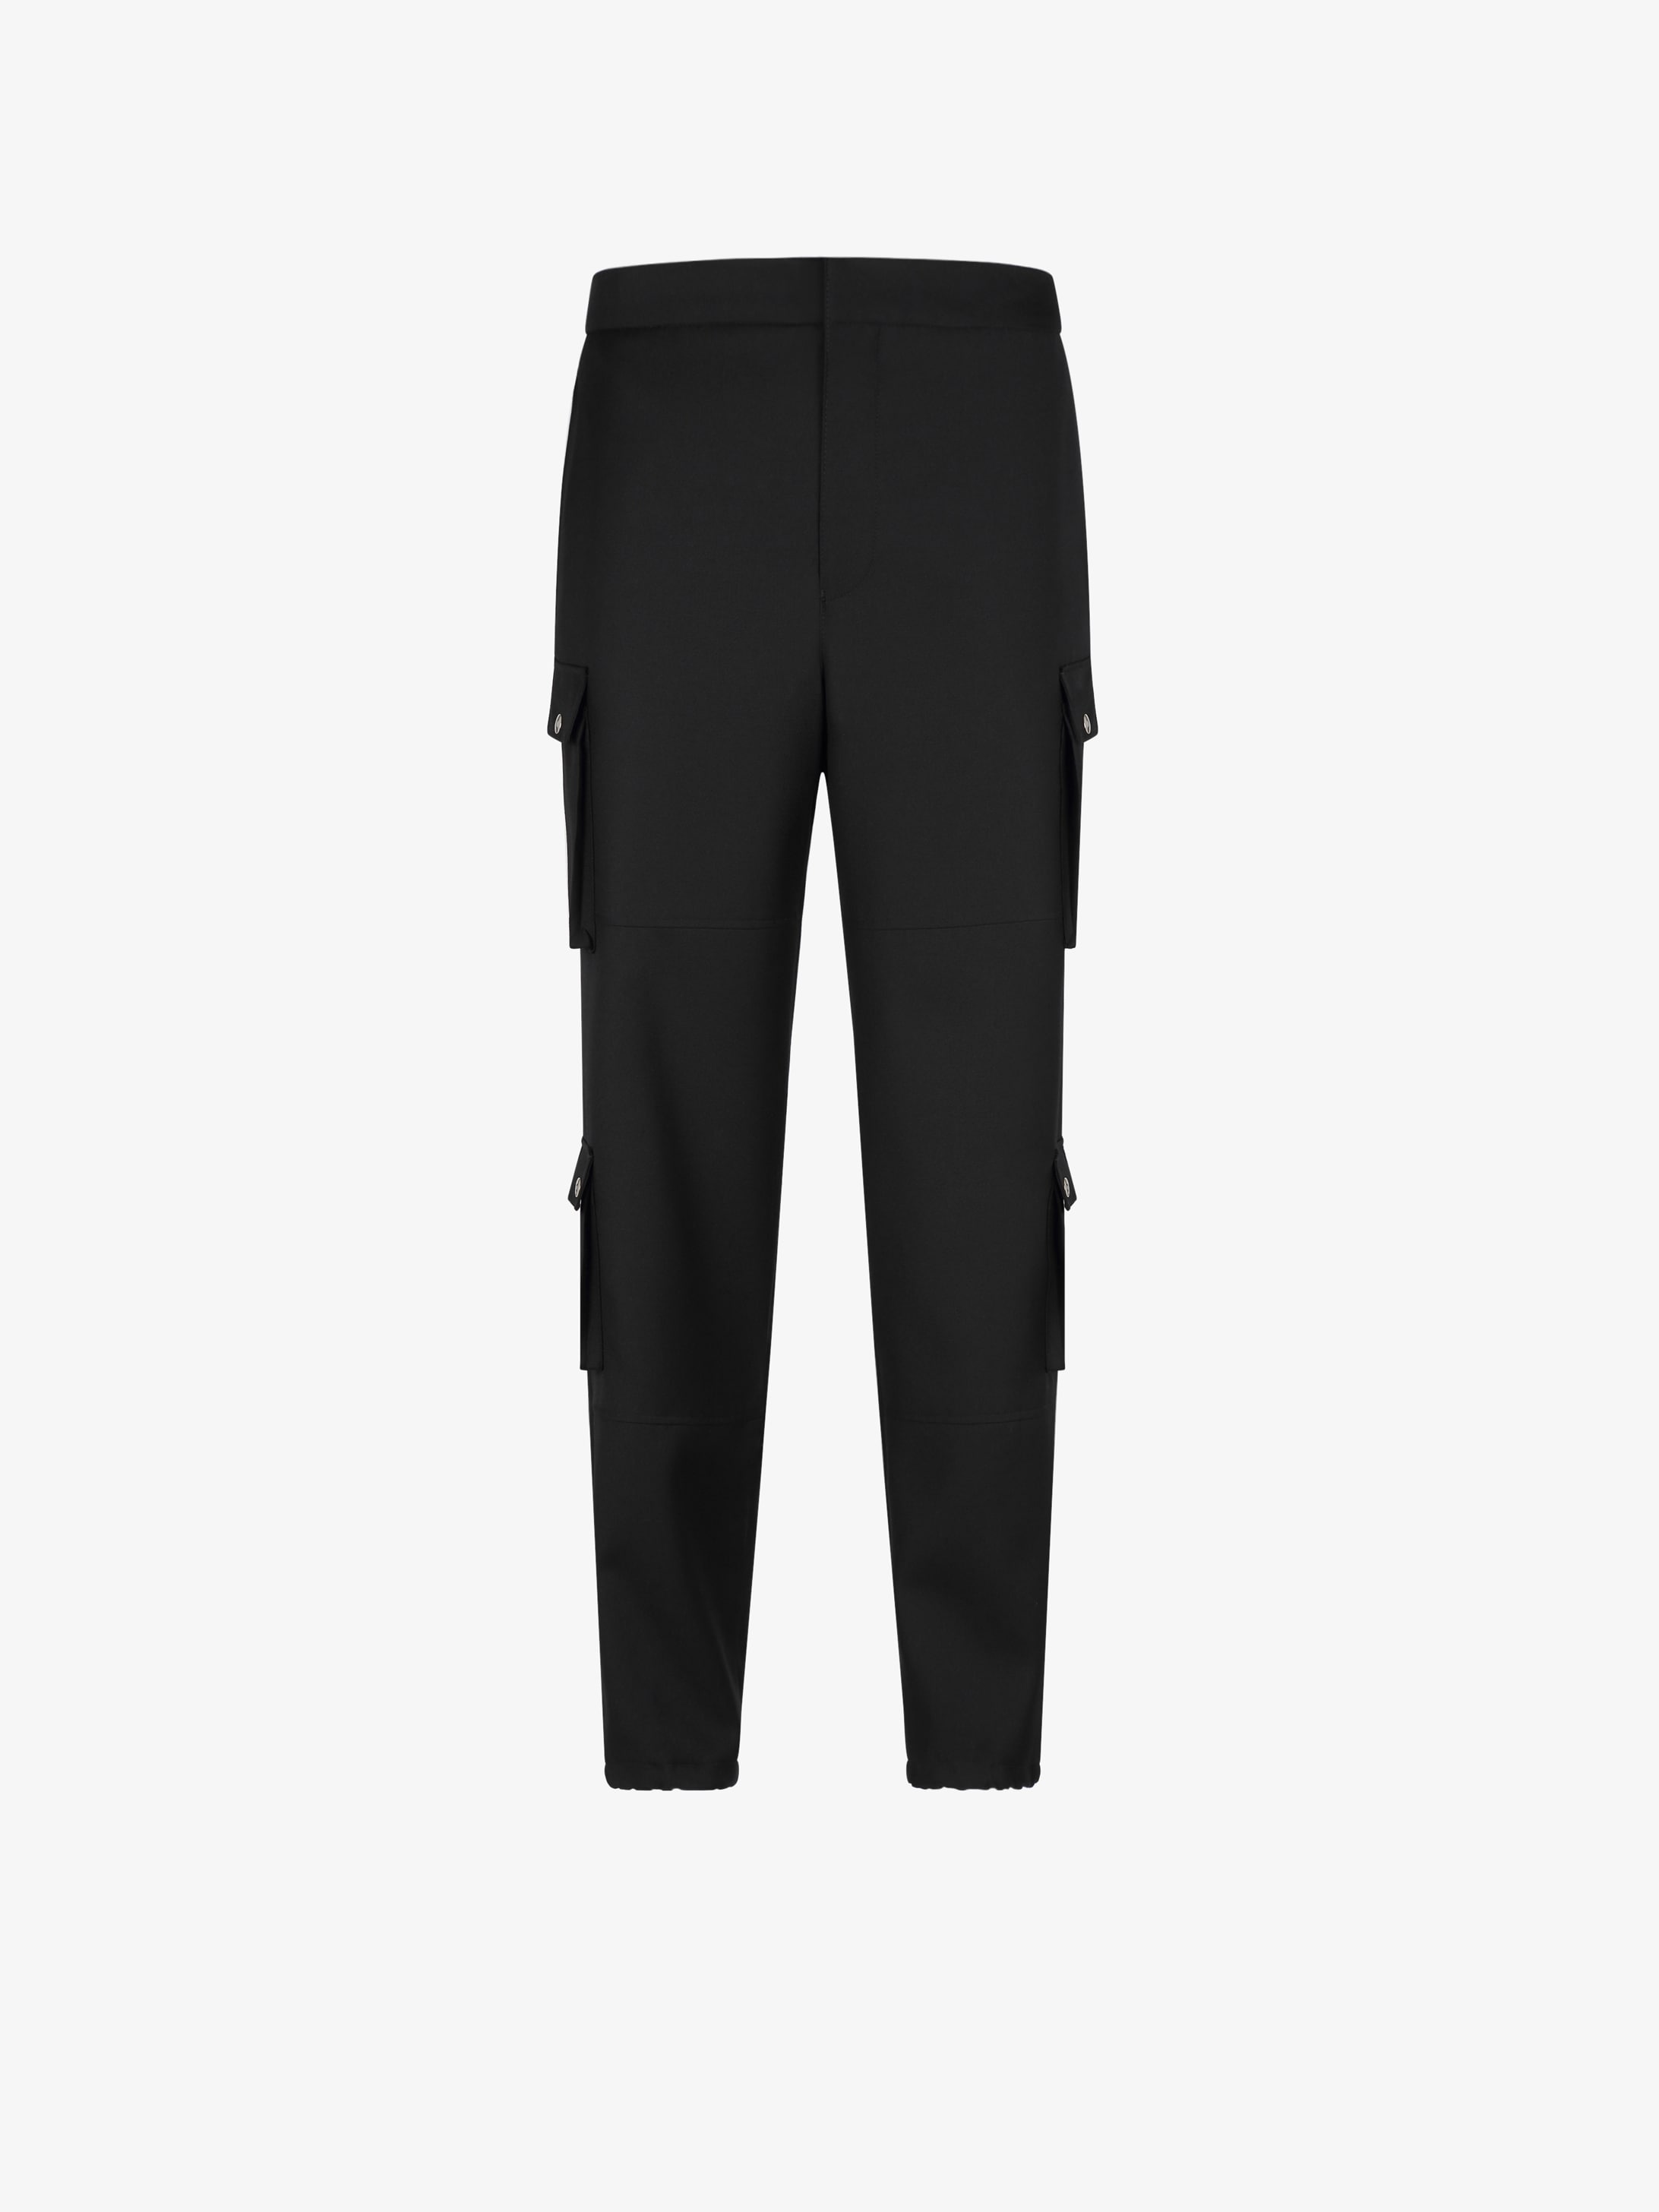 GIVENCHY patch cargo pants in wool | GIVENCHY Paris